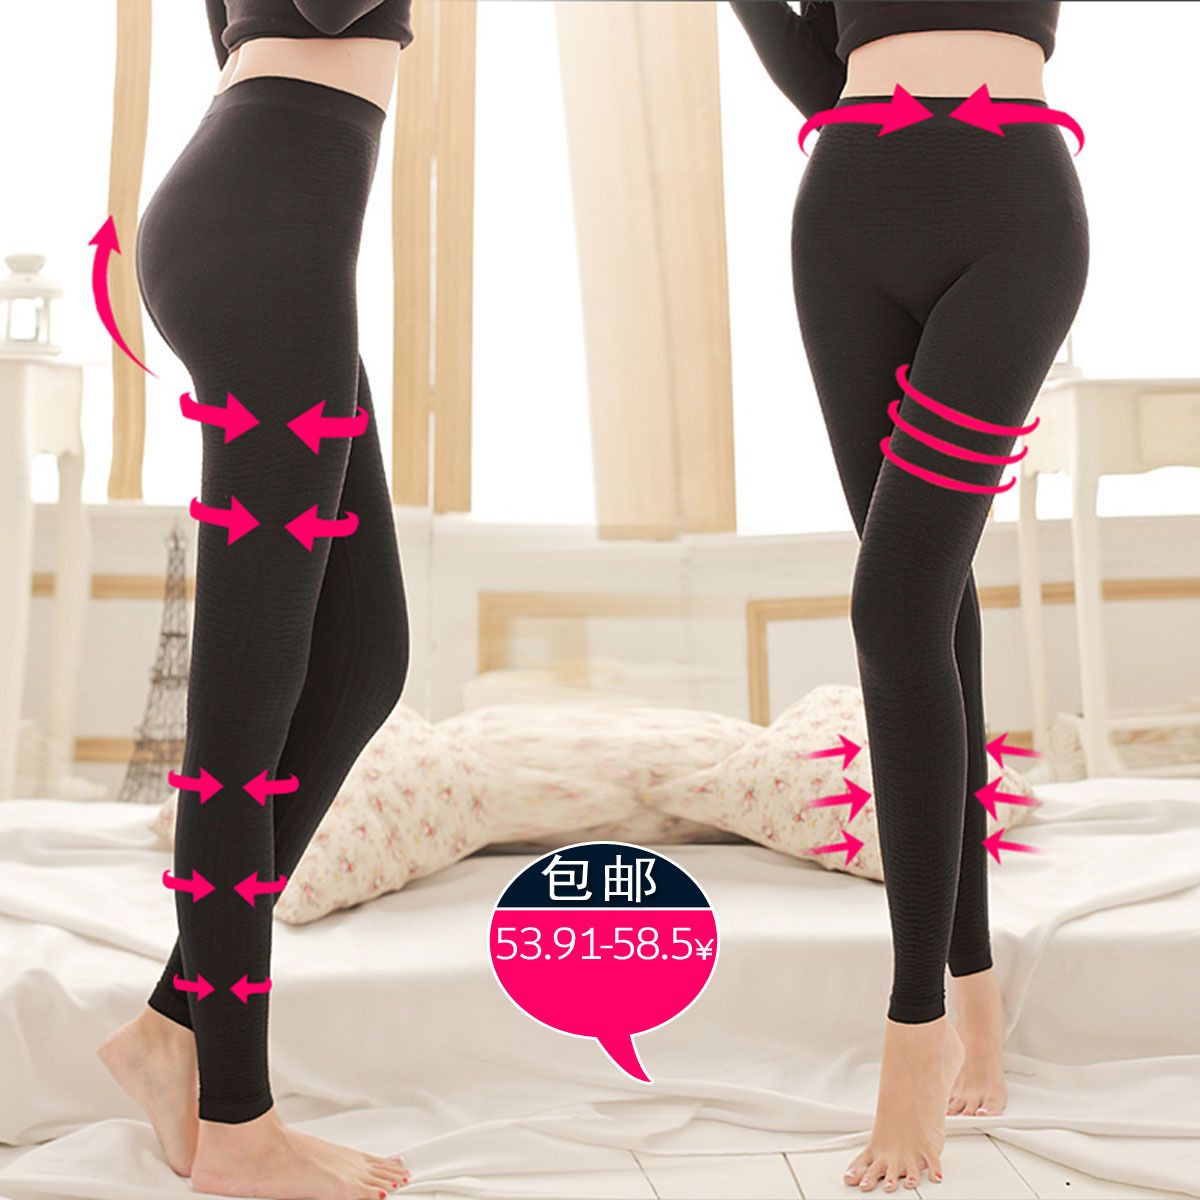 Autumn new arrival beauty care body shaping pants stovepipe pants stovepipe untucked step on the foot tights legging